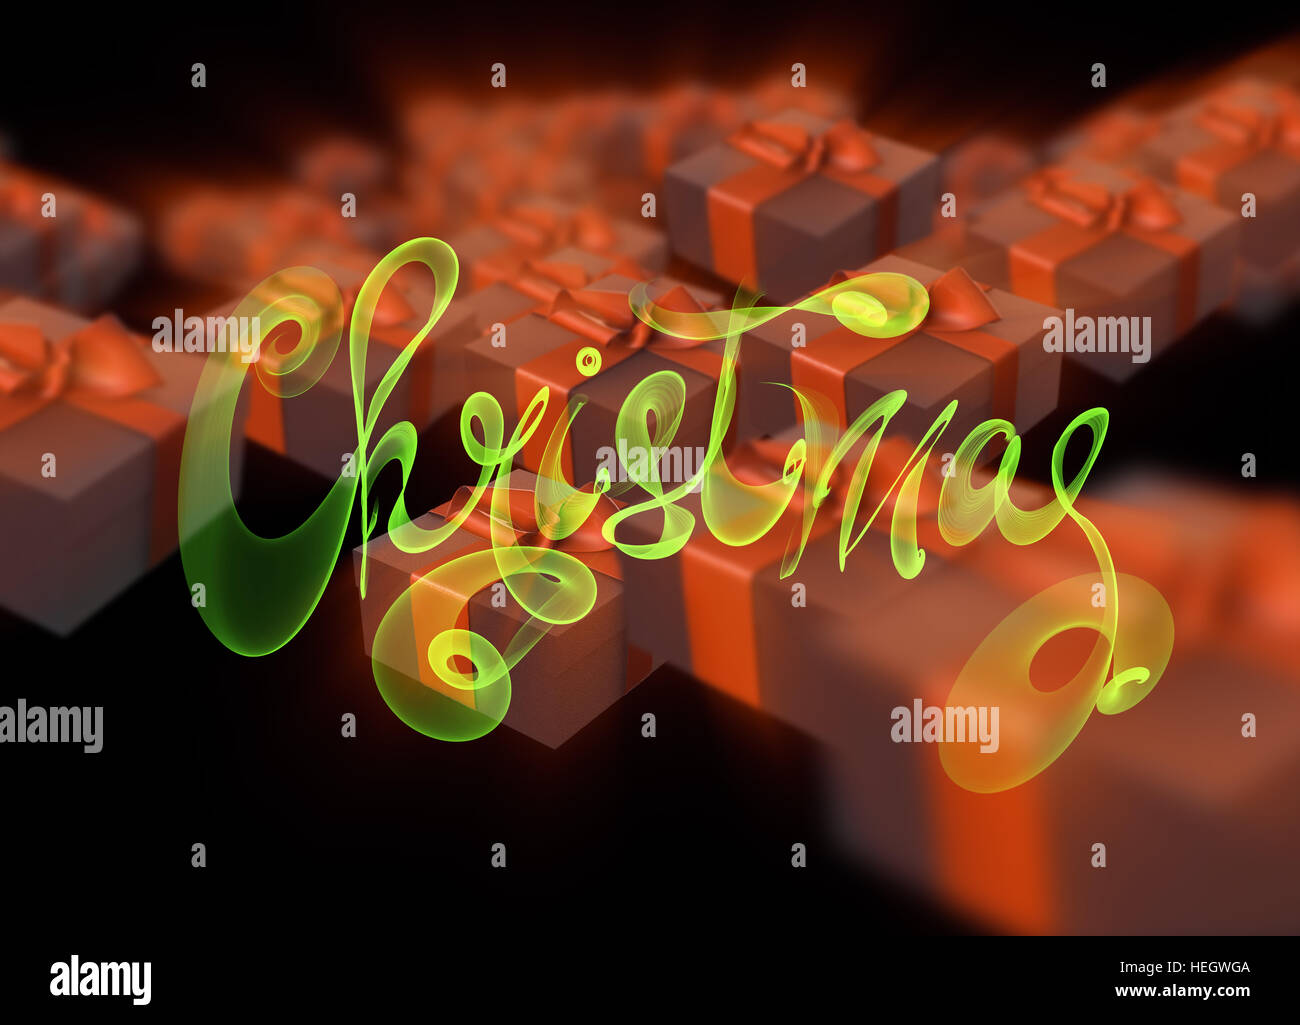 Christmas New Year colorful red and green gift boxes with bows of ribbons flying on black background. 3d illustration and lettering made of fire flame Stock Photo